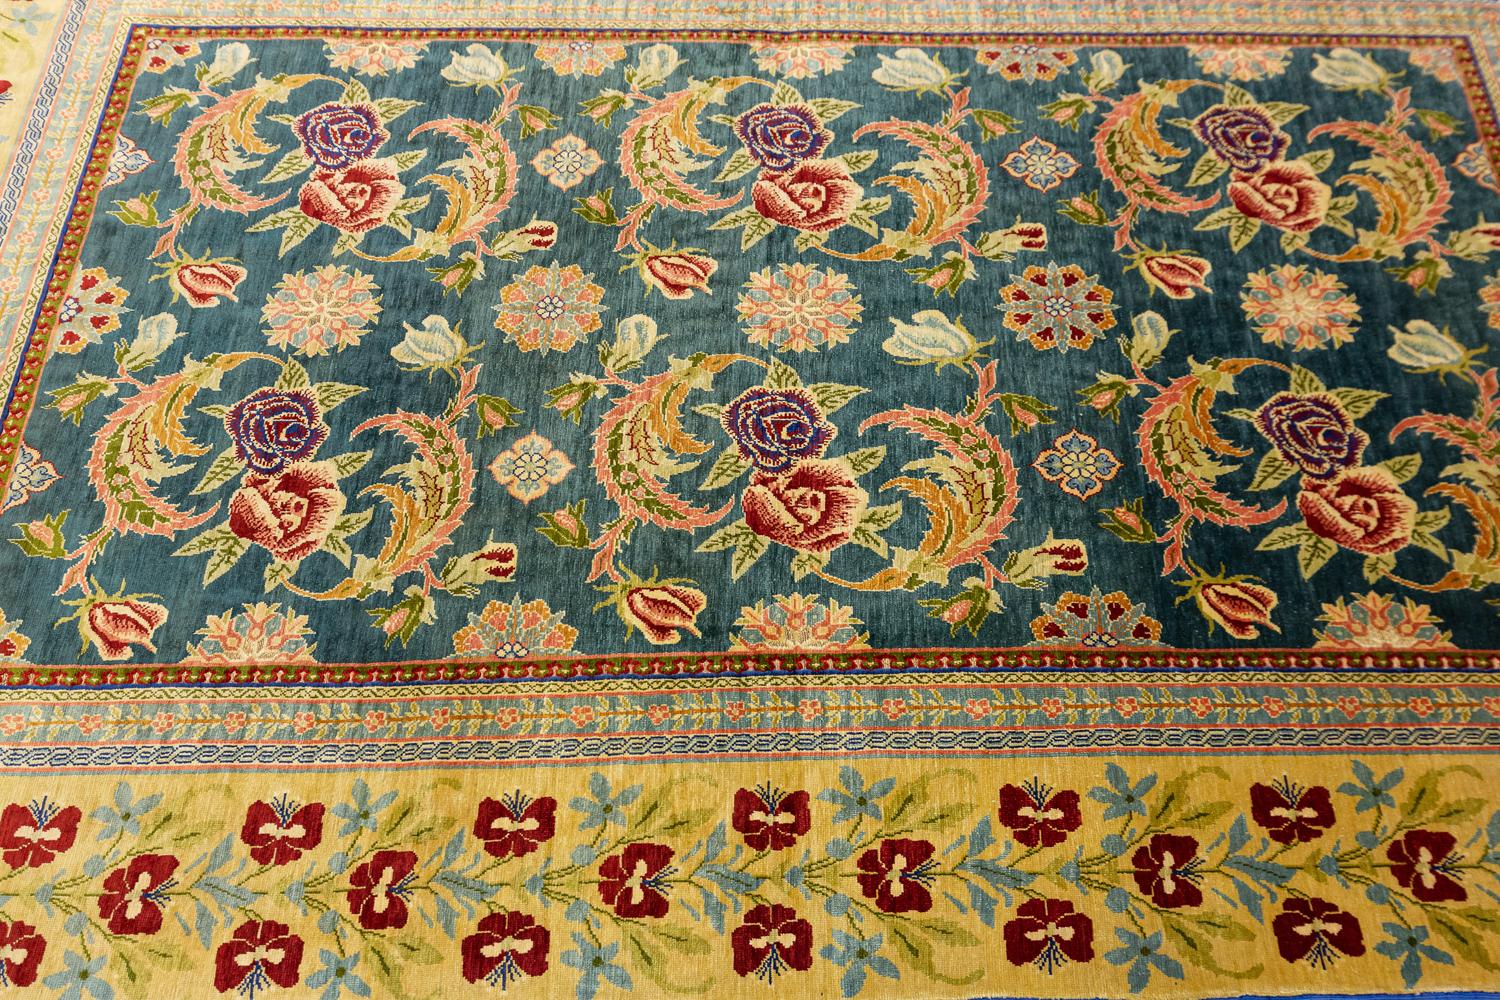 This is a silk and metal threaded Hereke rug woven in Turkey circa 1950-1970 and measures 147 x 87 cm in size. It has an allover floral design with two columns of blossoming rose motifs set on a green background color. The border is decorated with